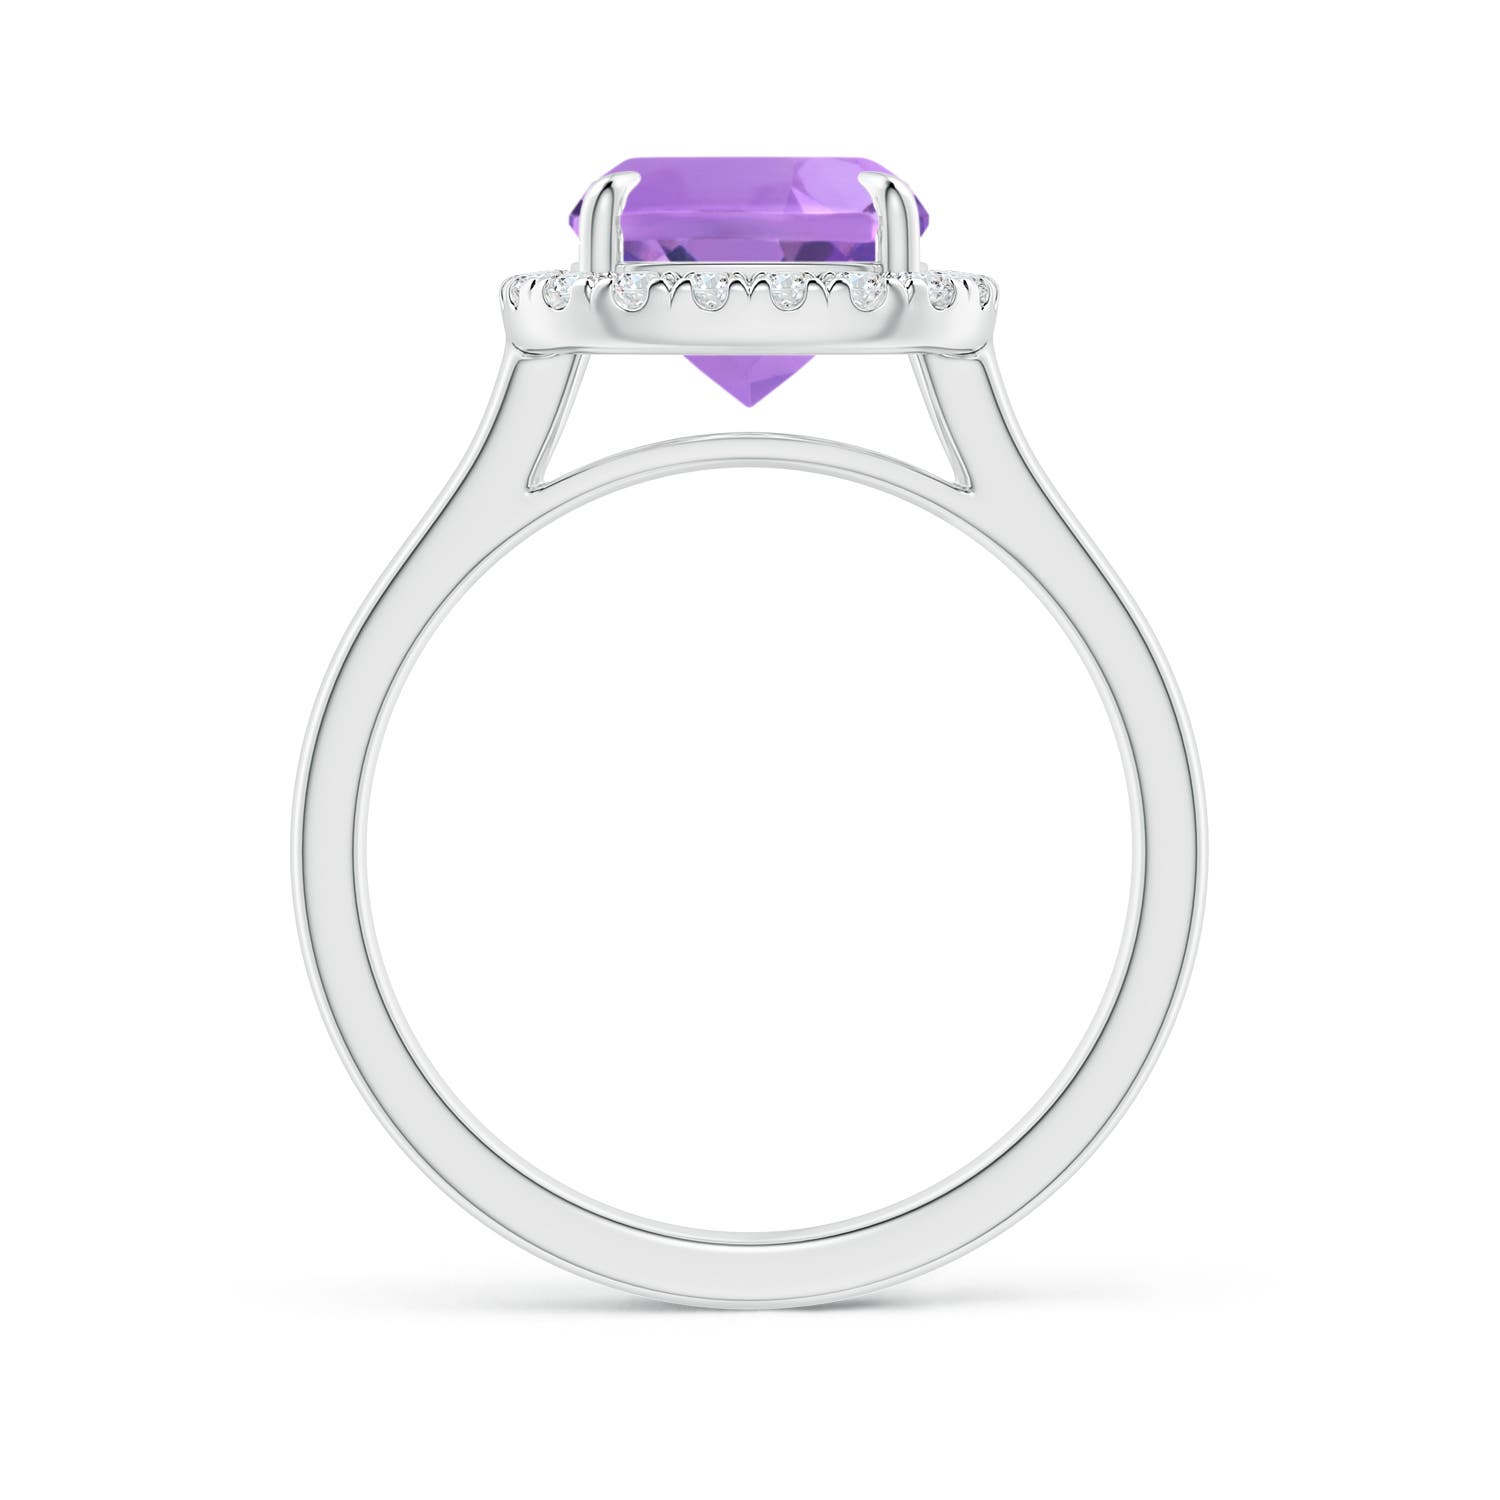 A - Amethyst / 3.01 CT / 14 KT White Gold